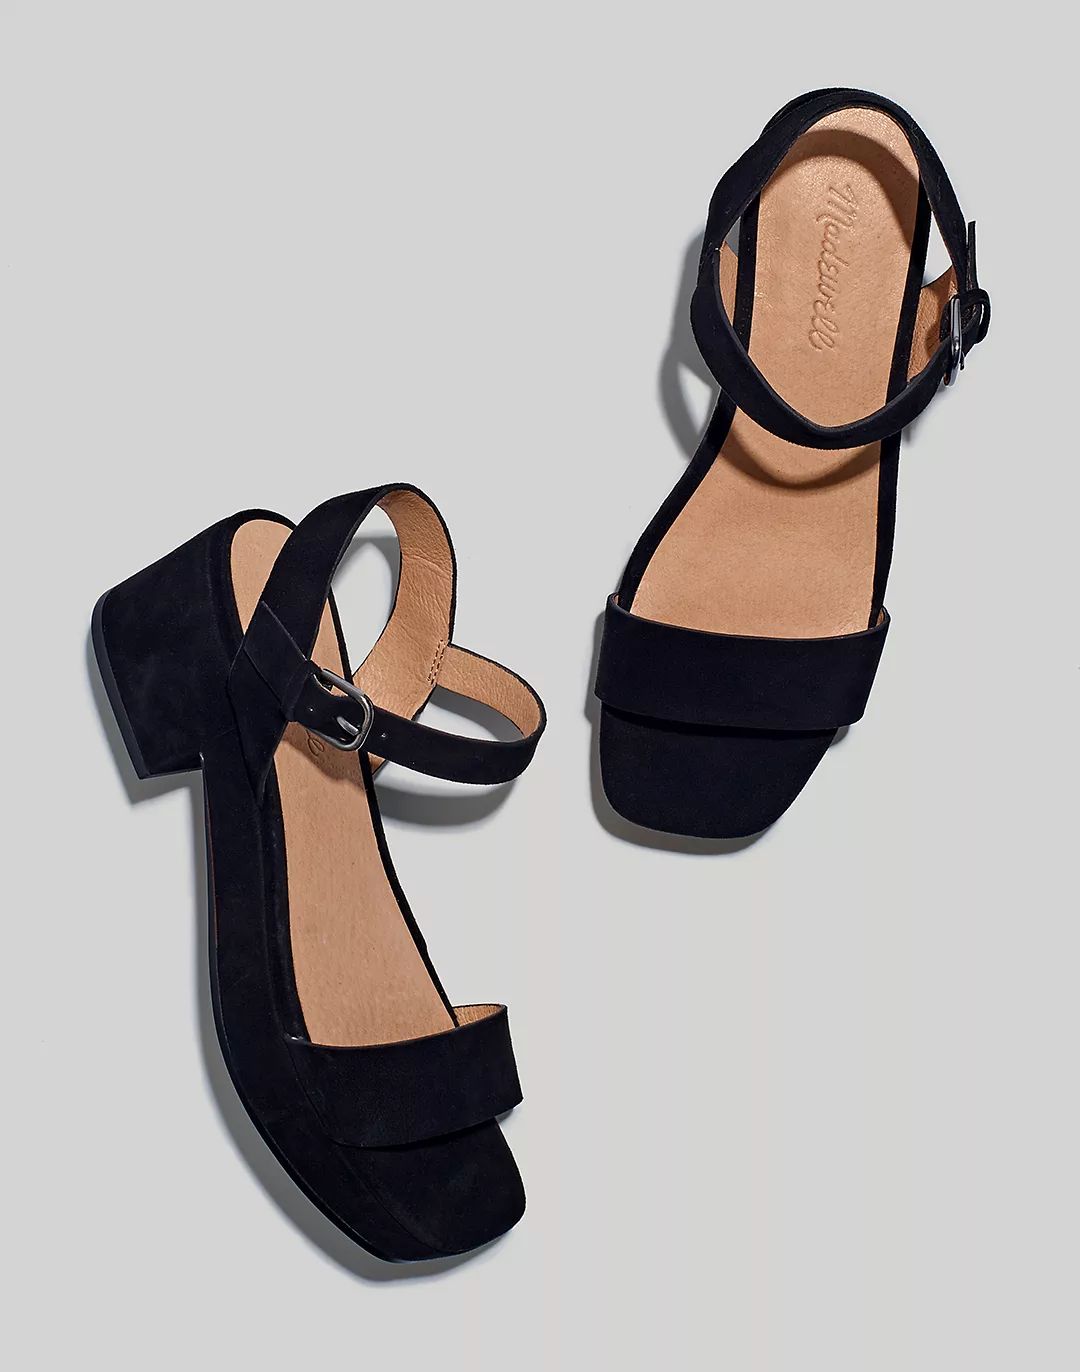 The Lina Platform Sandal in Suede | Madewell